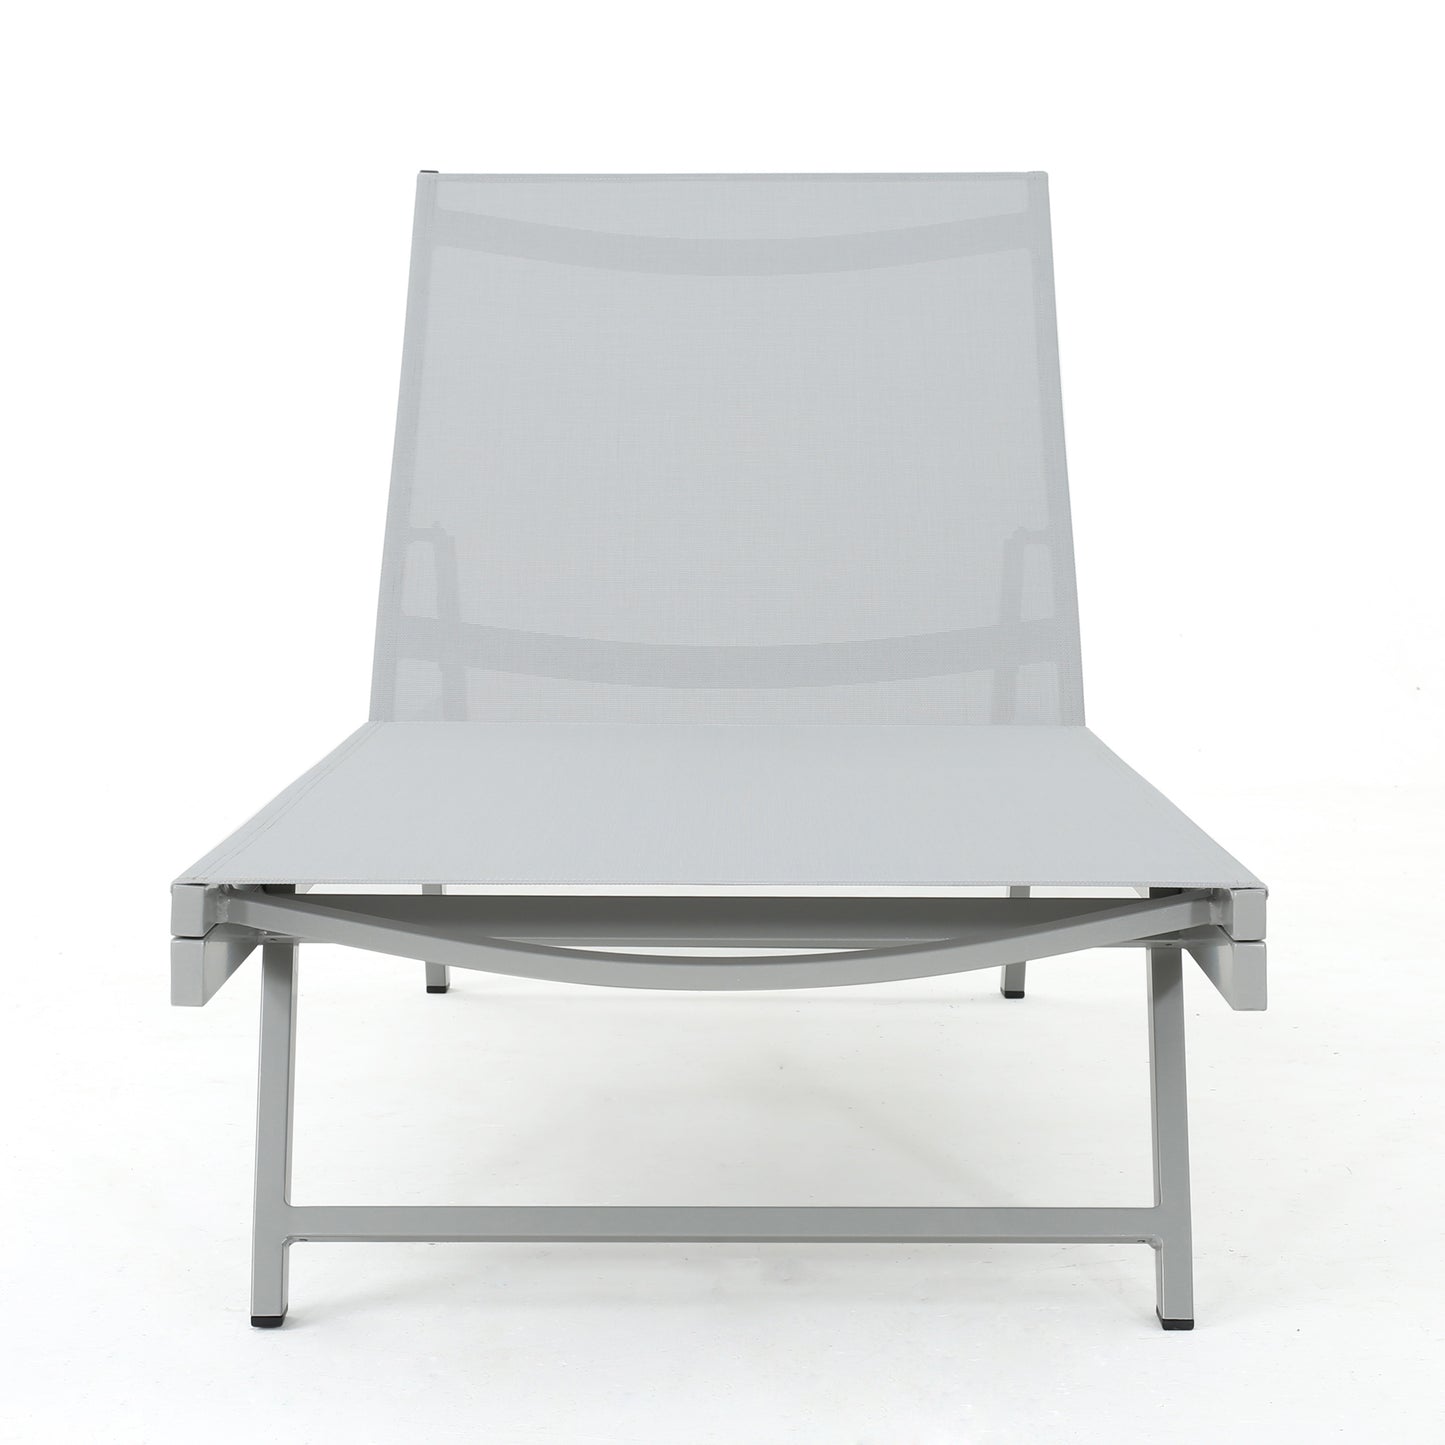 Holm Outdoor Gray Mesh Chaise Lounge with Aluminum Frame